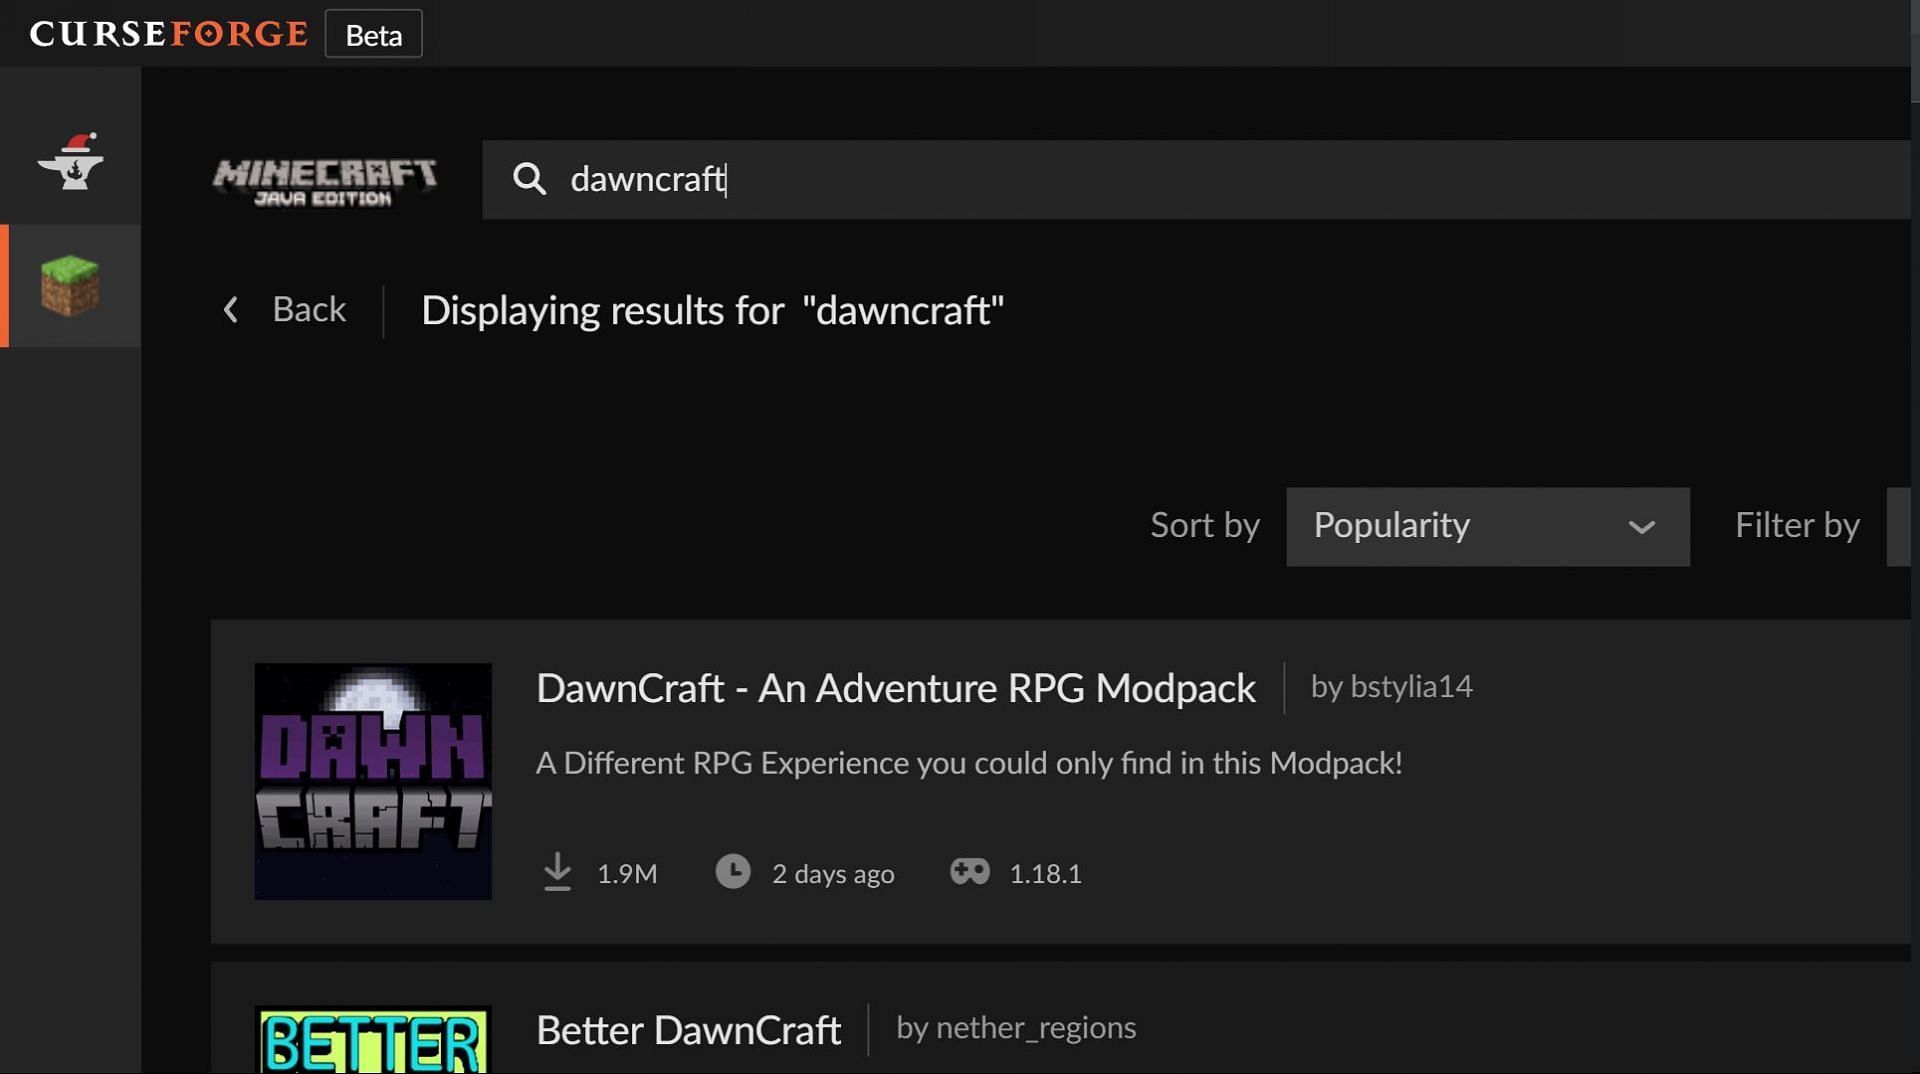 Find DawnCraft modpack for Minecraft in Forge app and install it (Image via Sportskeeda)